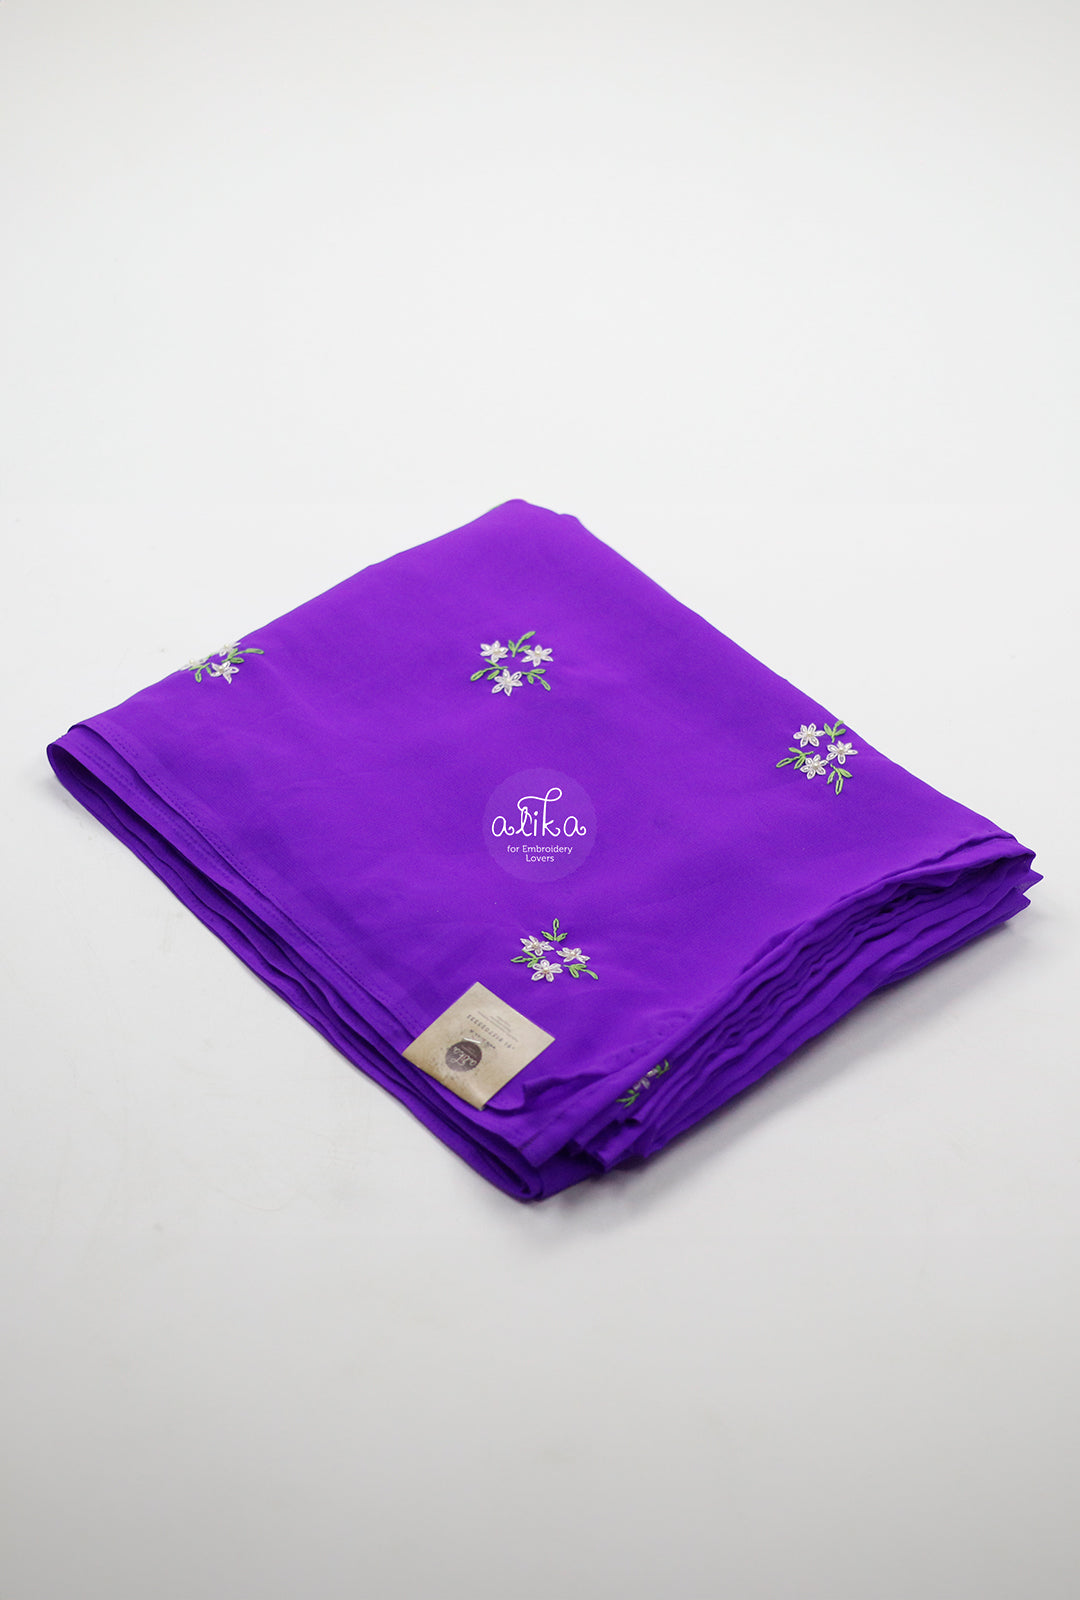 VIOLET ORGANZA SAREE WITH LAZY DAISY HAND EMBROIDERY AND BEAD WORK